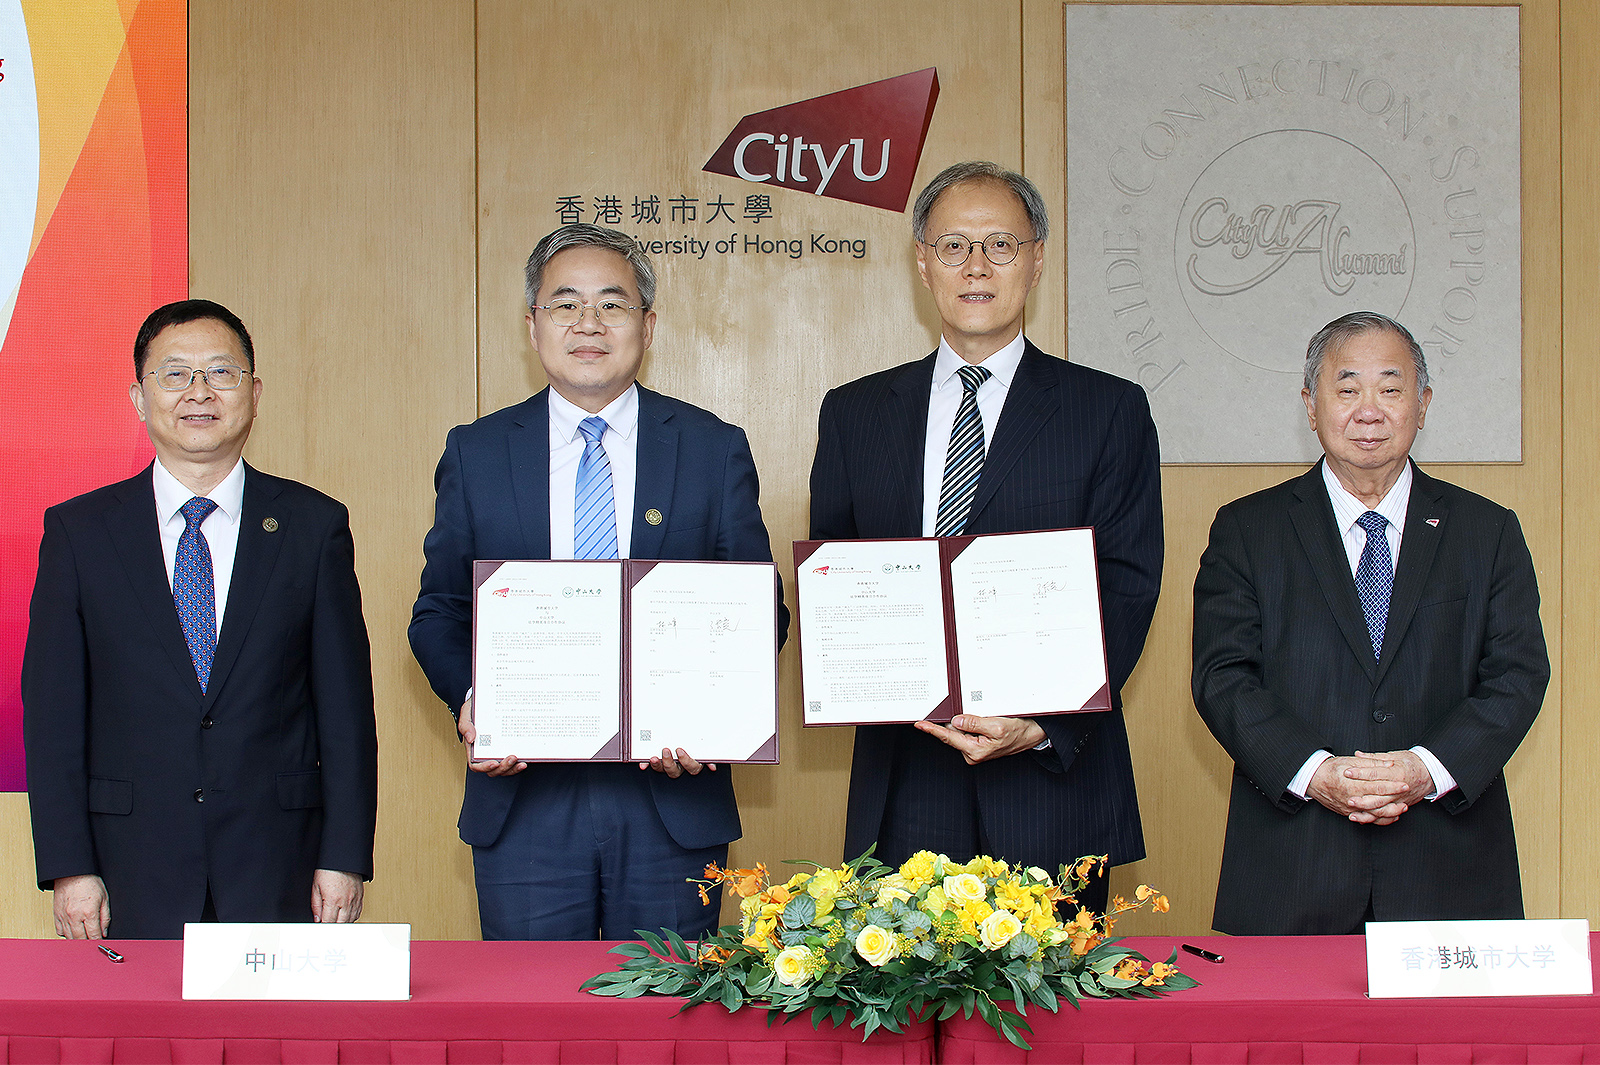 Professor Lin (second right) and Professor Zhang (second left) sign a cooperation agreement on the exchange of law students, witnessed by President Boey (first right) and President Gao (first left).